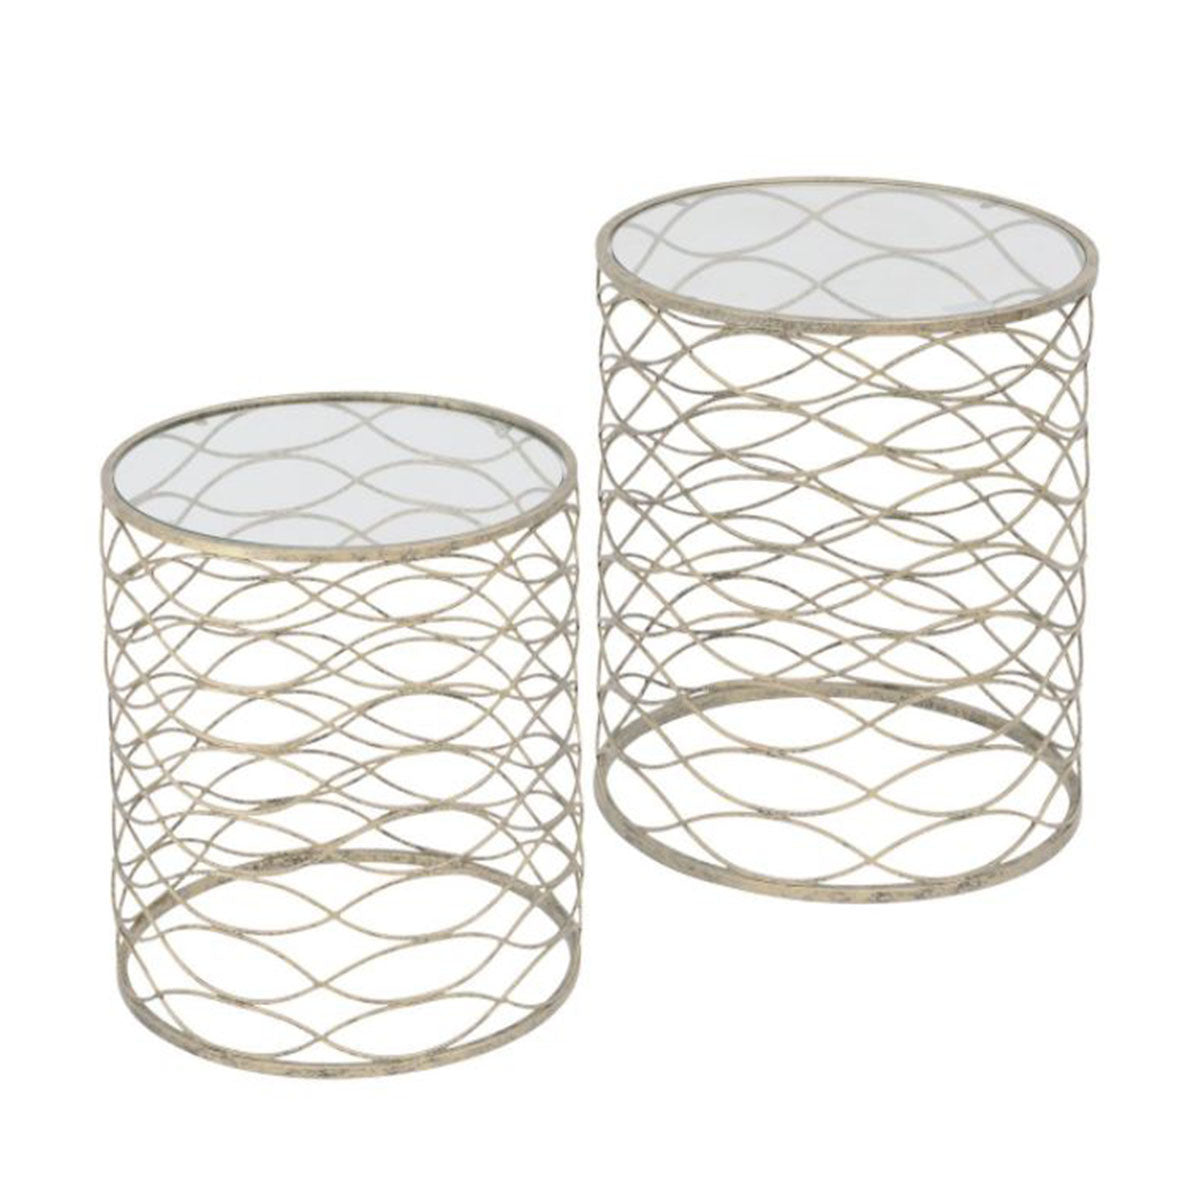 Gatsby Set Of 2 Gold Nesting Side Tables